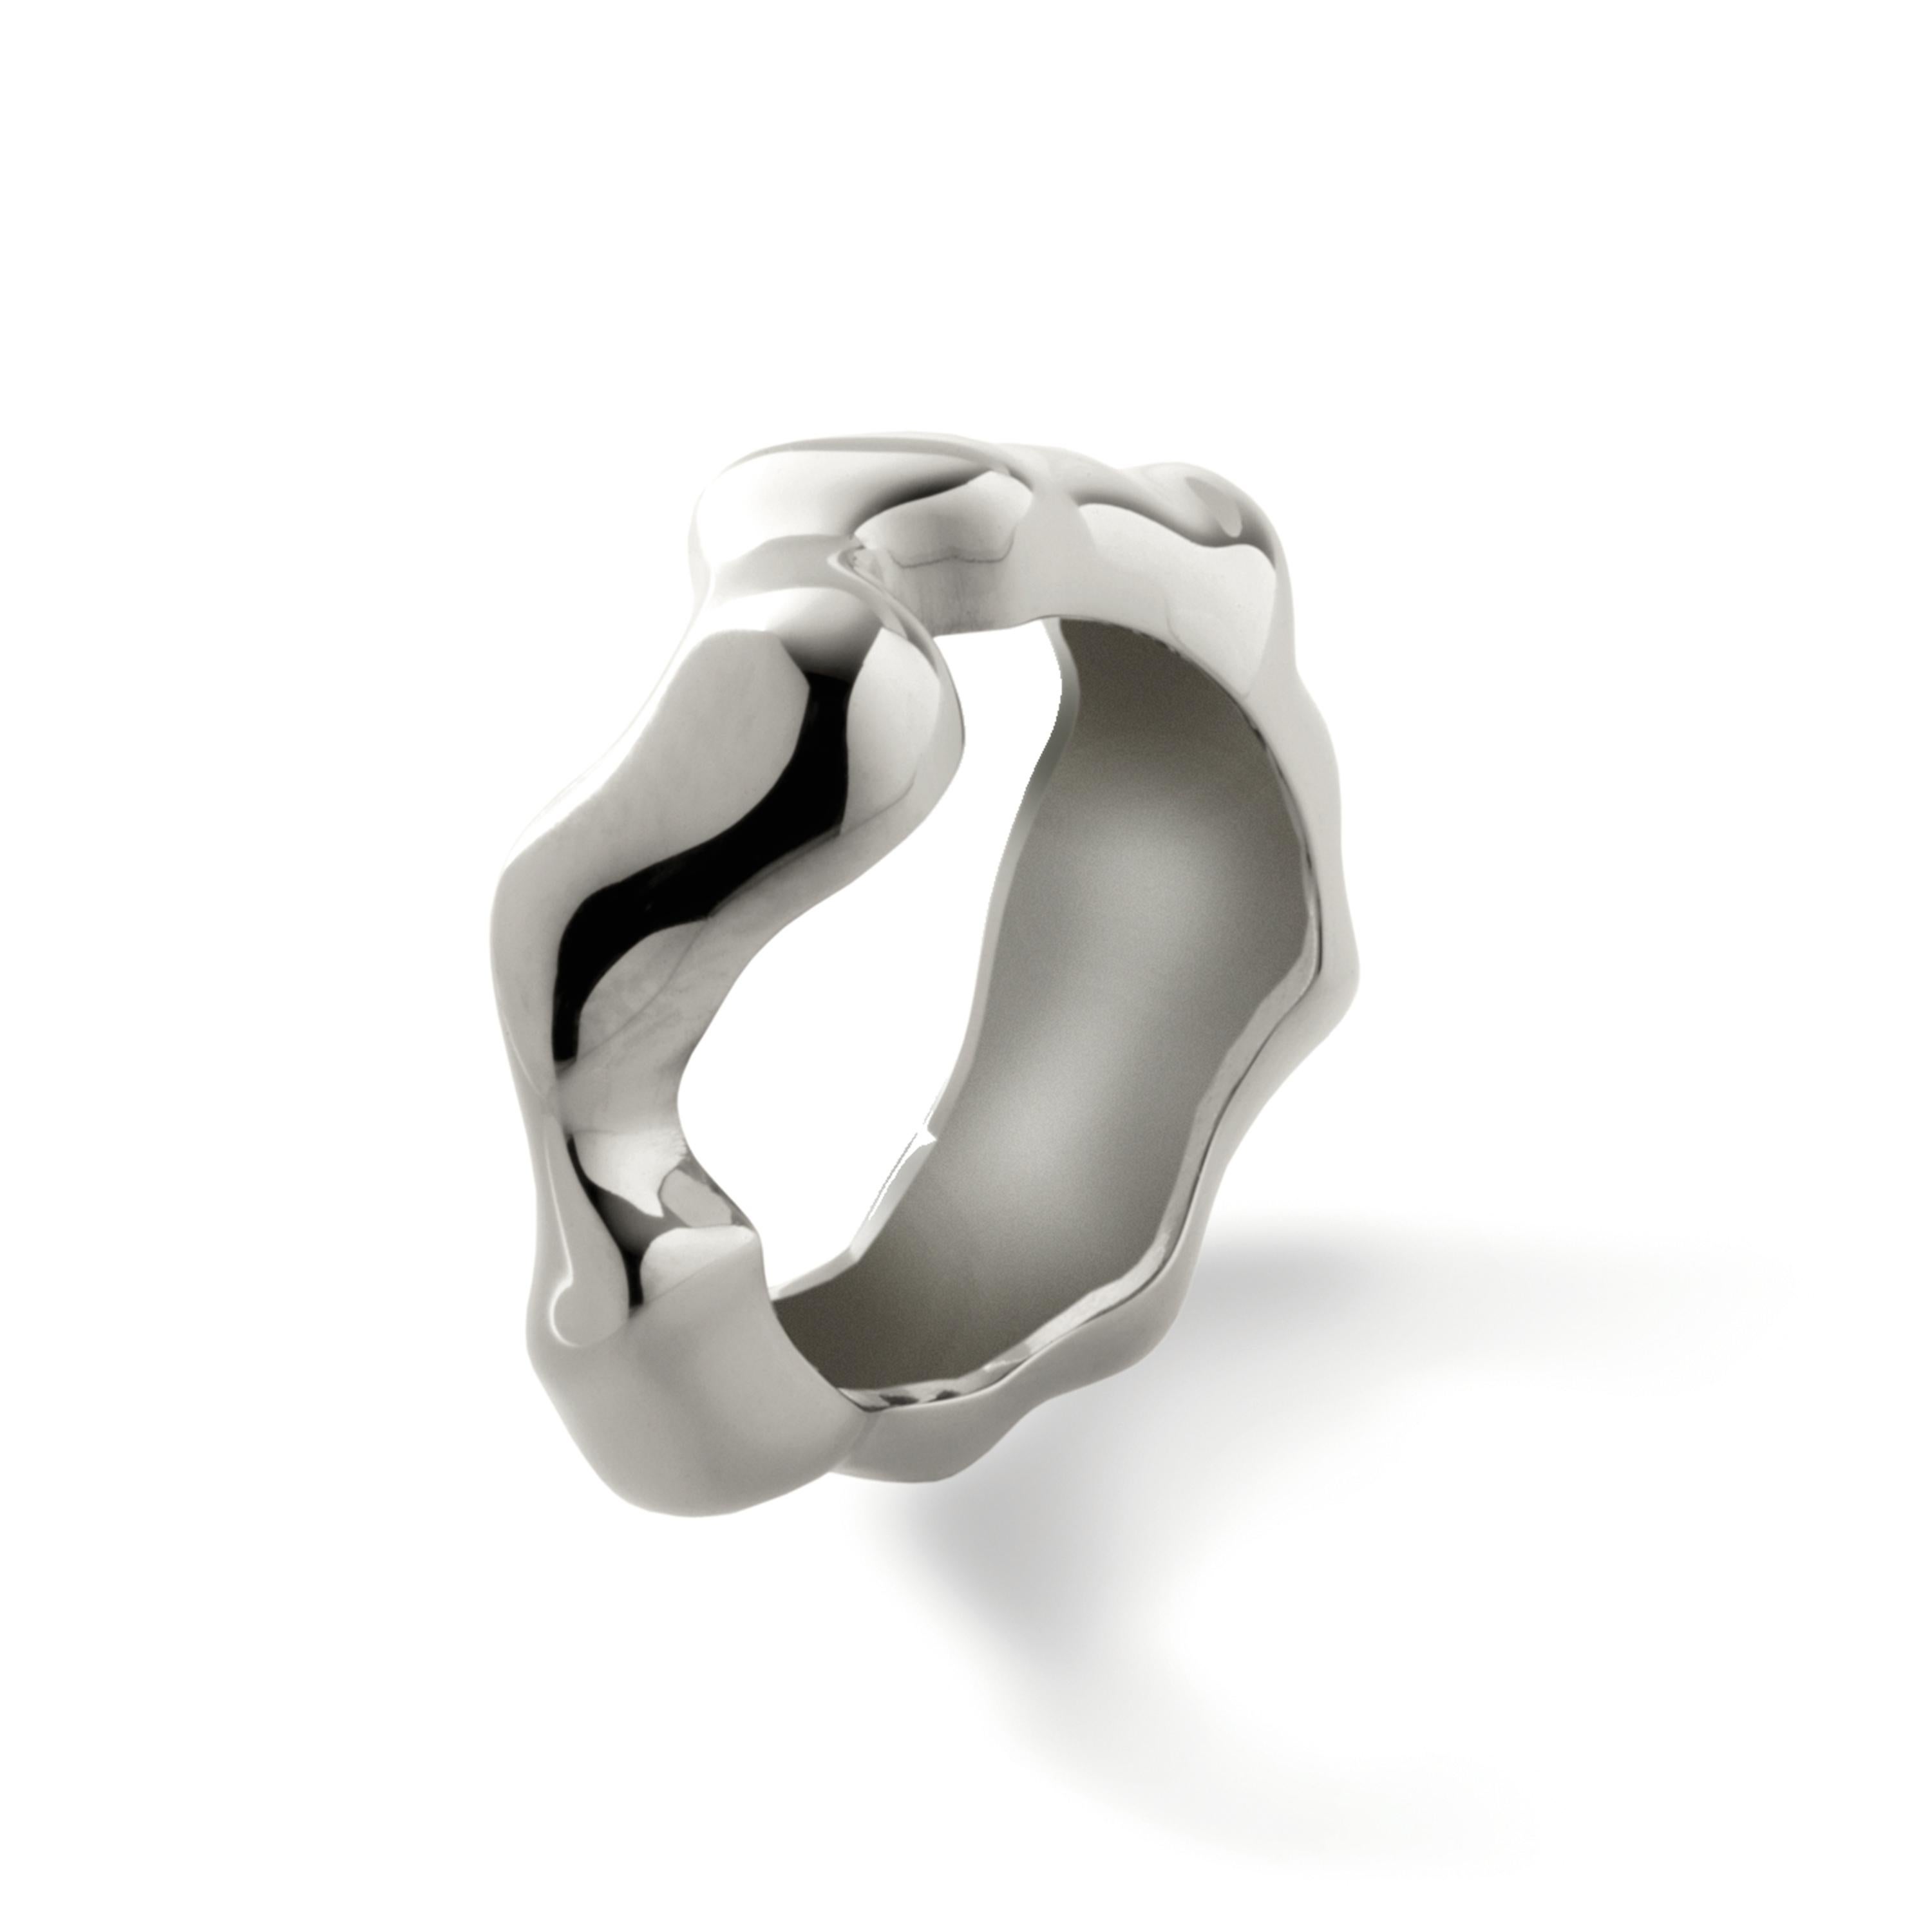 Made by hand in Nathalie Jean's Milan atelier in limited edition, Mercure Fashion Ring is in rhodium plated sterling silver. Small, delicate, ebbing sculpture with seemingly random forms, these supple shapes are modulated in relief and seem to flow